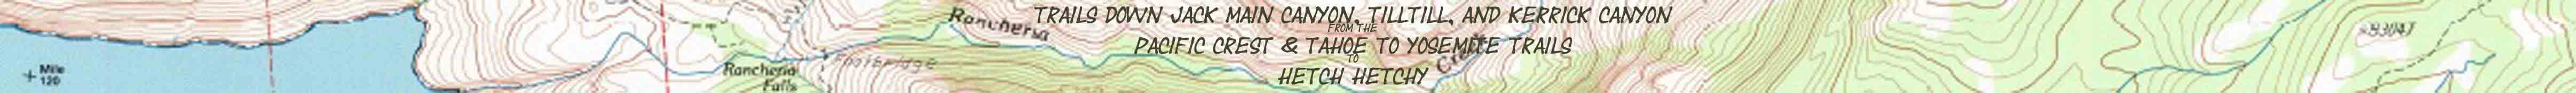 Backpacking map of Jack Main, Tilden Canyon, and Kerrick Canyon trails from PCT-TYT to Hetch Hetchy Reservoir.